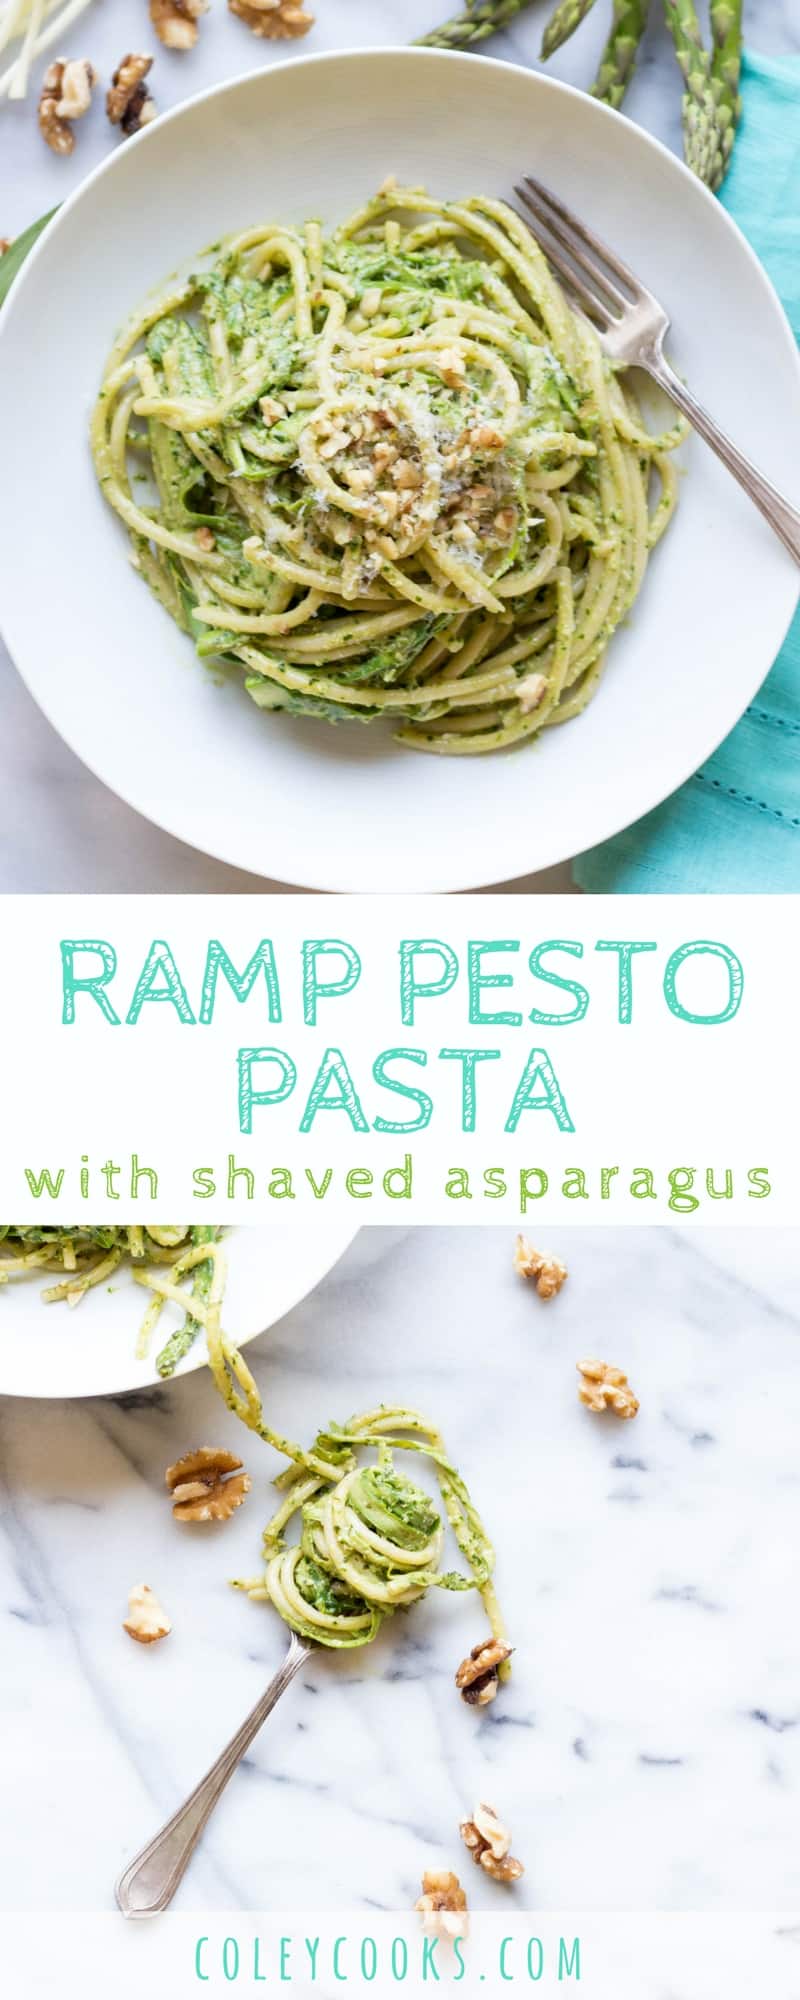 RAMP PESTO PASTA with SHAVED ASPARAGUS | This is the perfect quick and easy spring recipe!| ColeyCooks.com